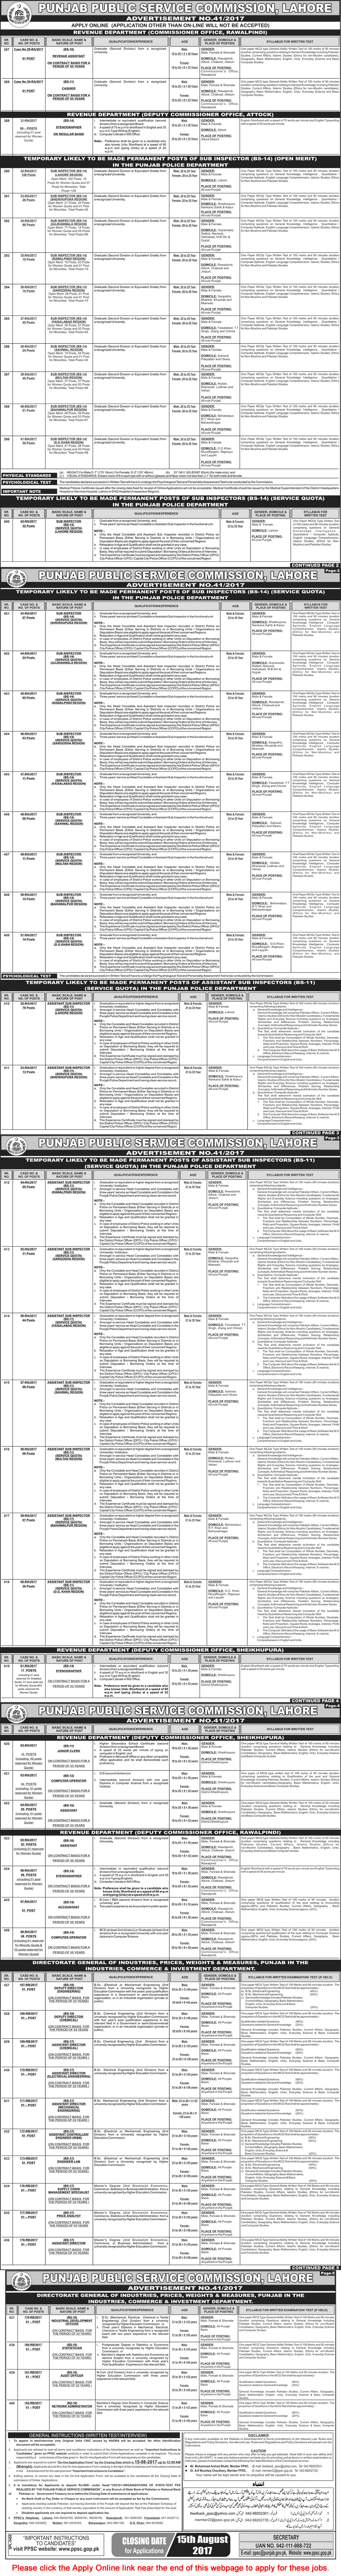 PPSC Jobs July 2017 August Apply Online Consolidated Advertisement No 41/2017 Latest